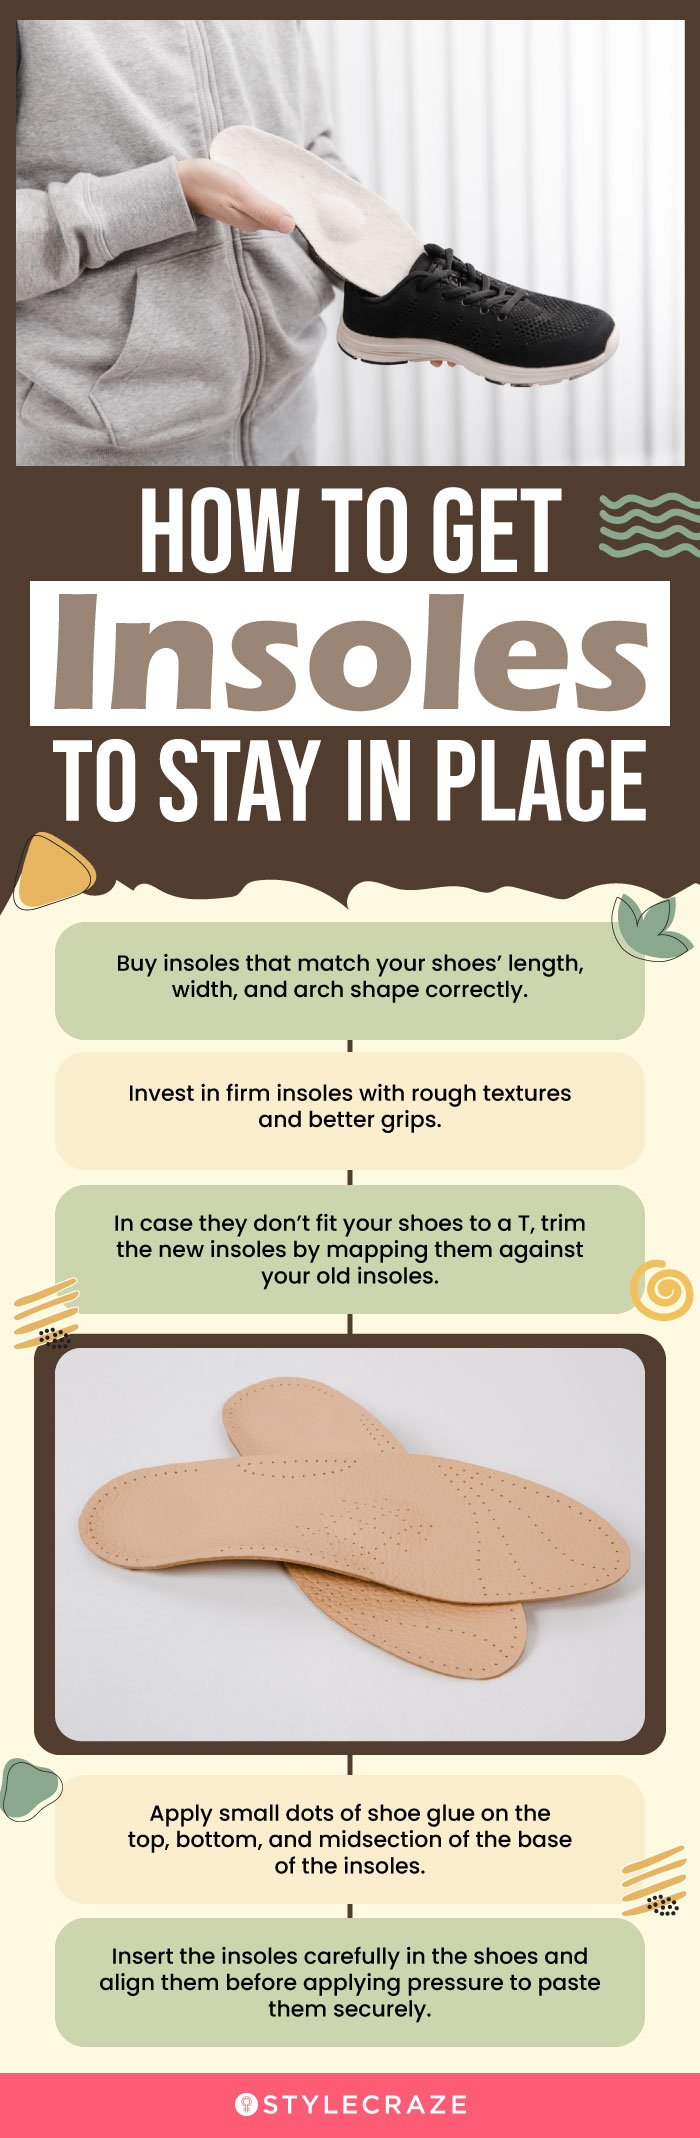 How To Get Insoles To Stay In Place (infographic)